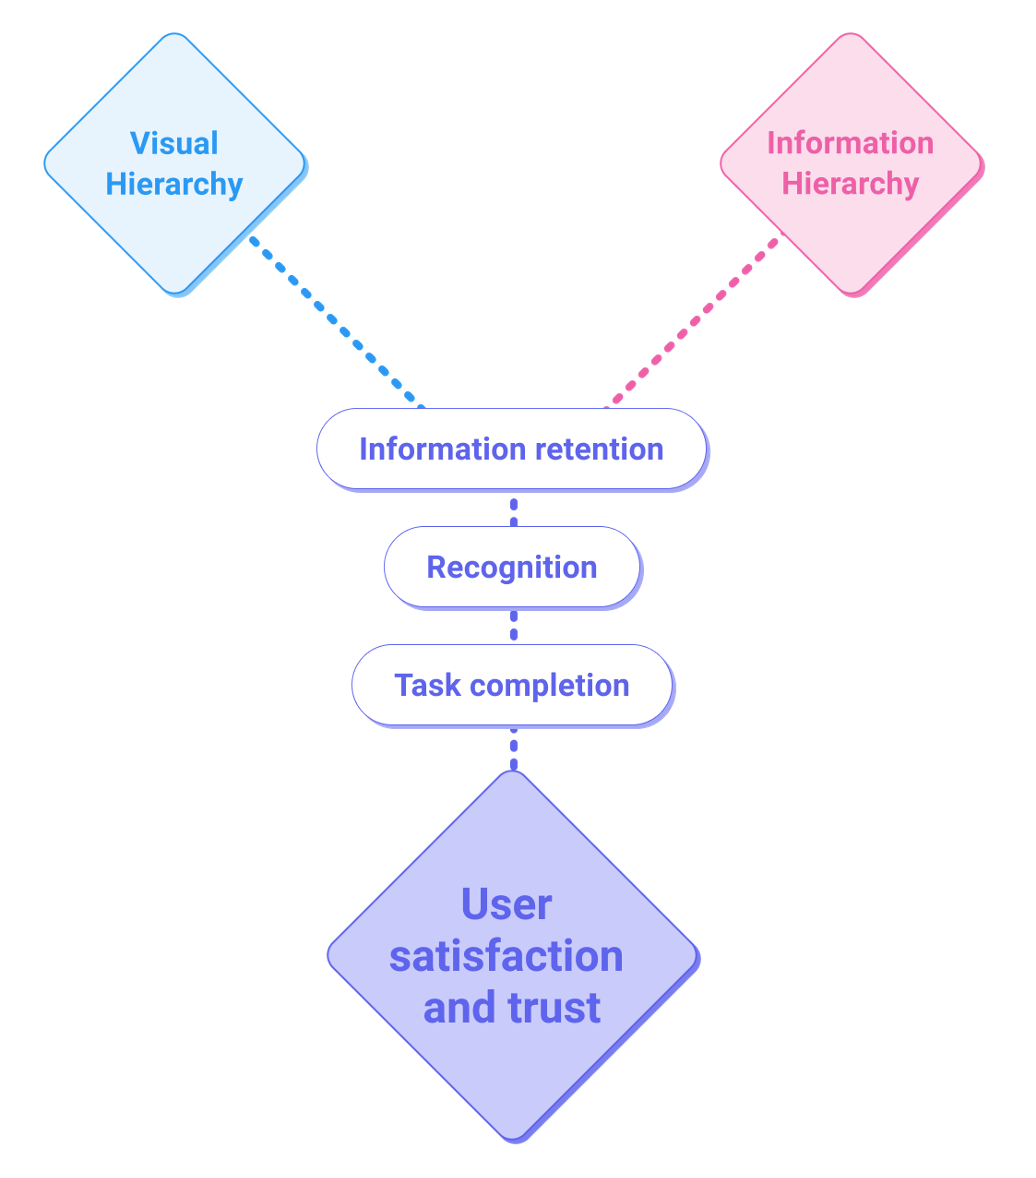 Relationship between information and visual hierarchy and trust